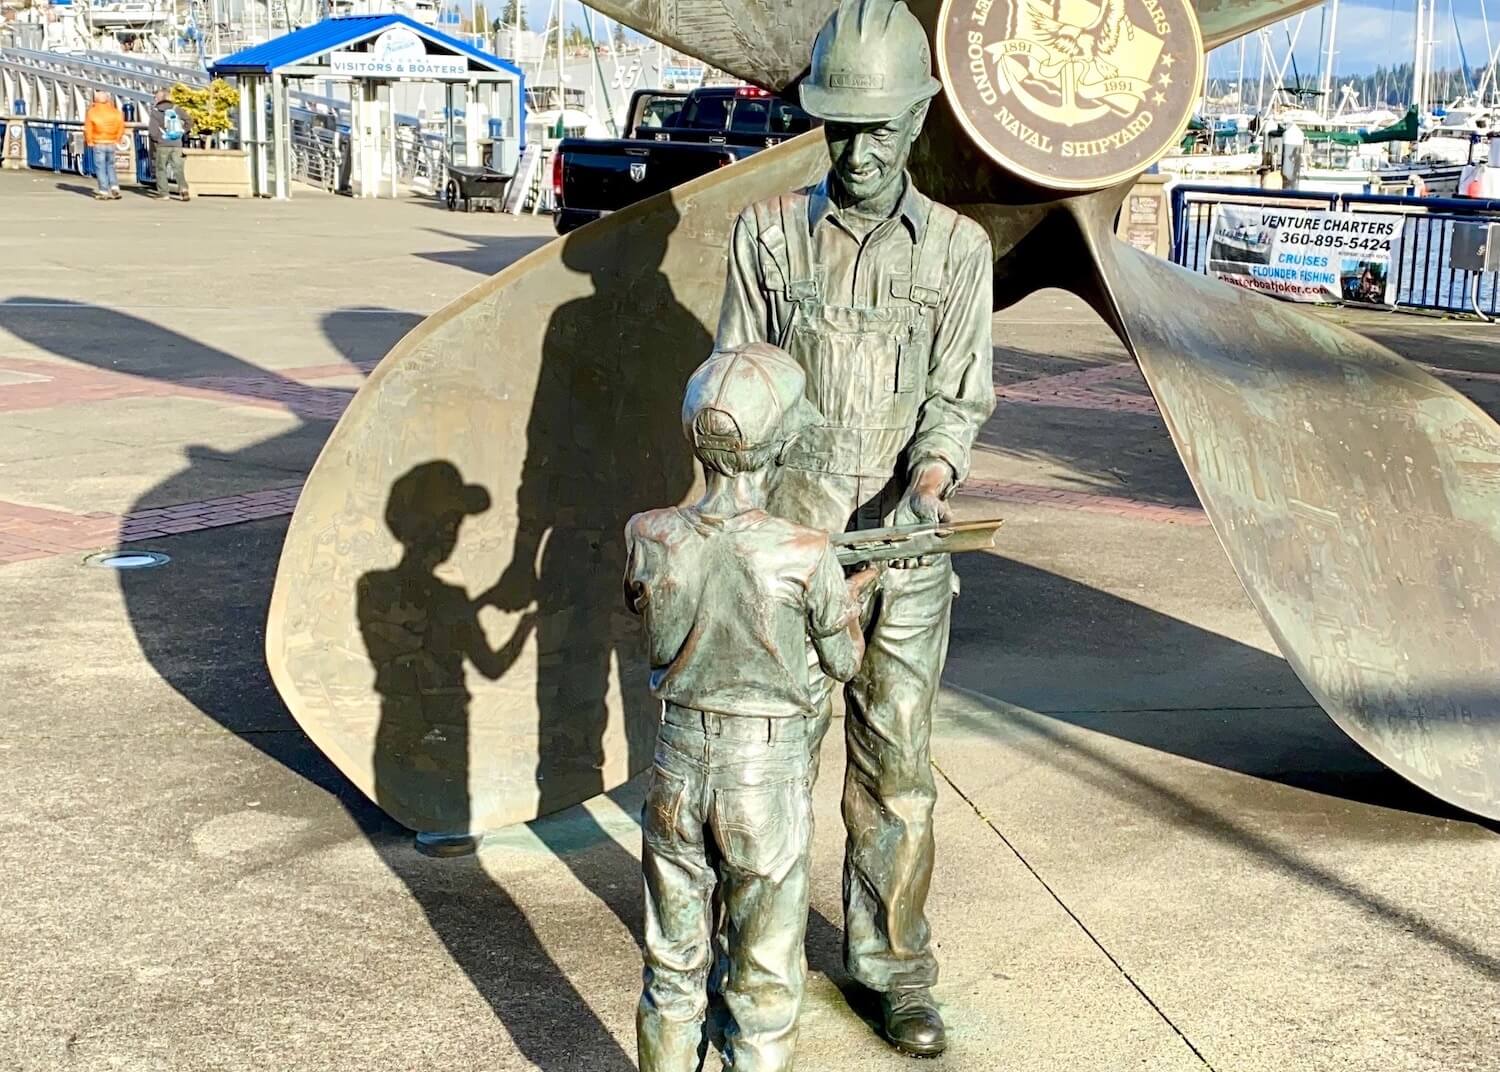 A bronze statue of a father passing on a shipbuilding tool to his young son. They are standing in front of a giant propulsion screw of a ship.